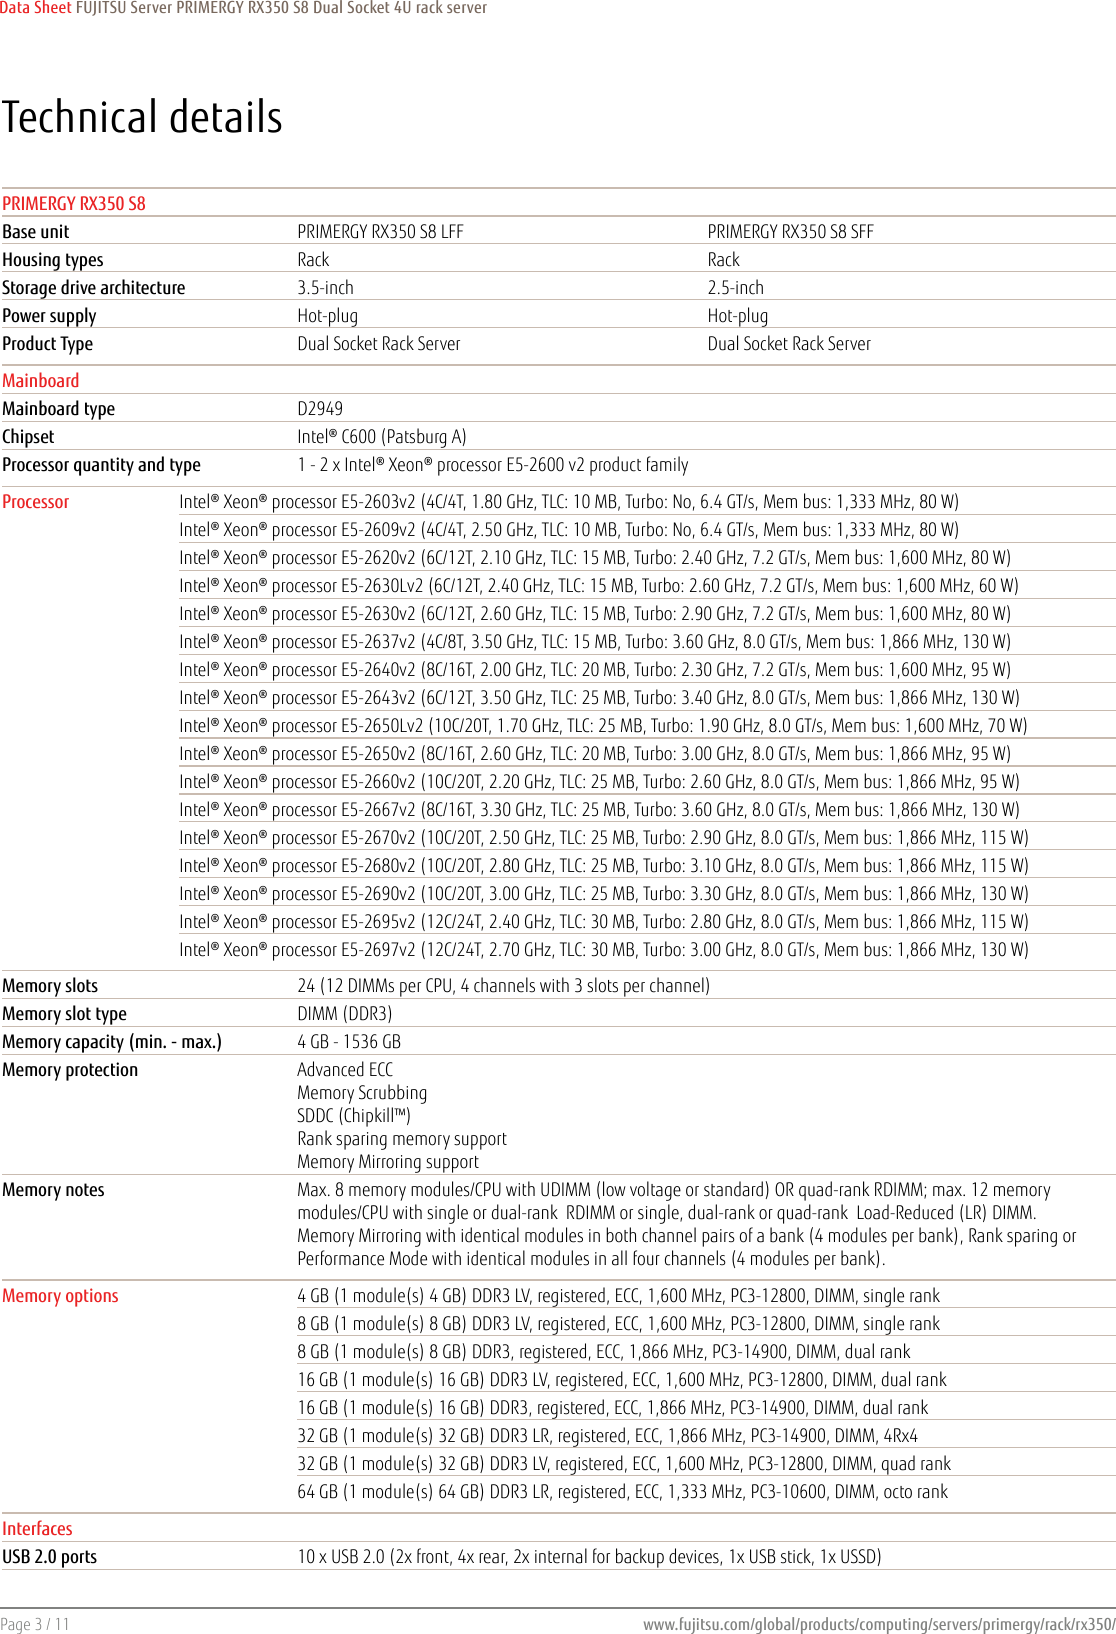 Page 3 of 11 - Fujitsu  PRIMERGY RX350 S8 Data Sheet Ds-py-rx350-s8